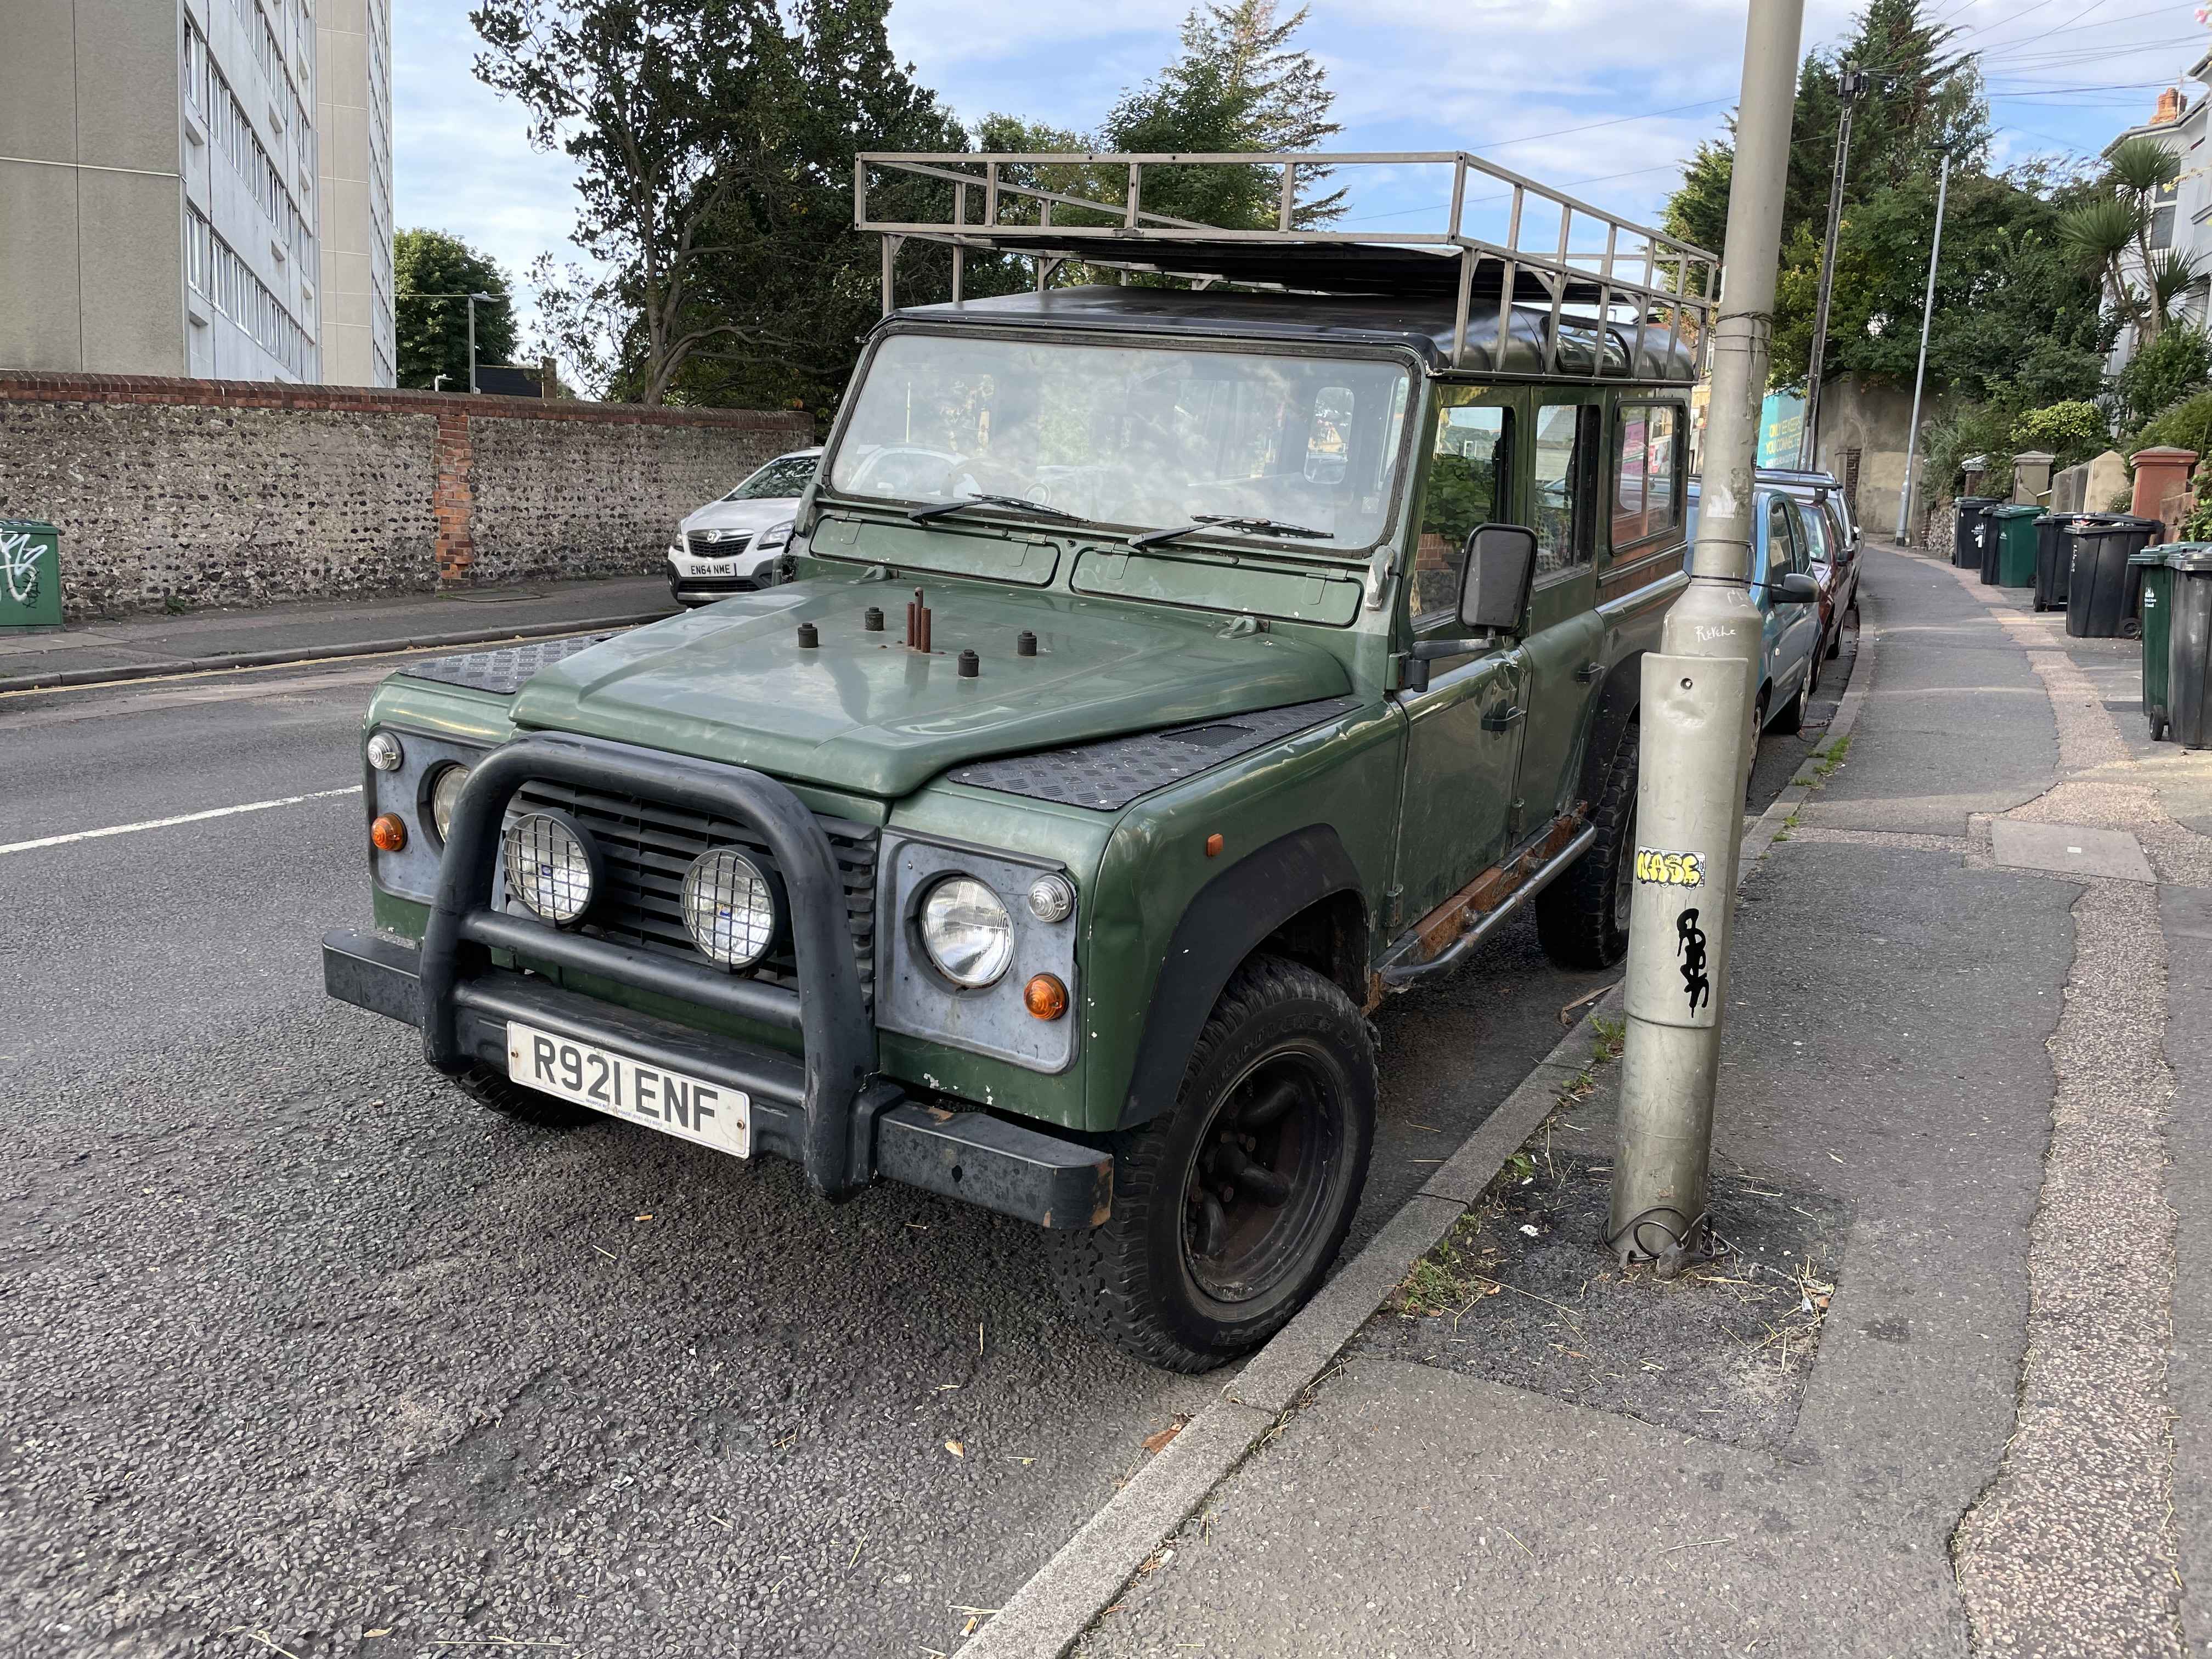 Photograph of R921 ENF - a Green Land Rover Defender parked in Hollingdean by a non-resident. The first of three photographs supplied by the residents of Hollingdean.